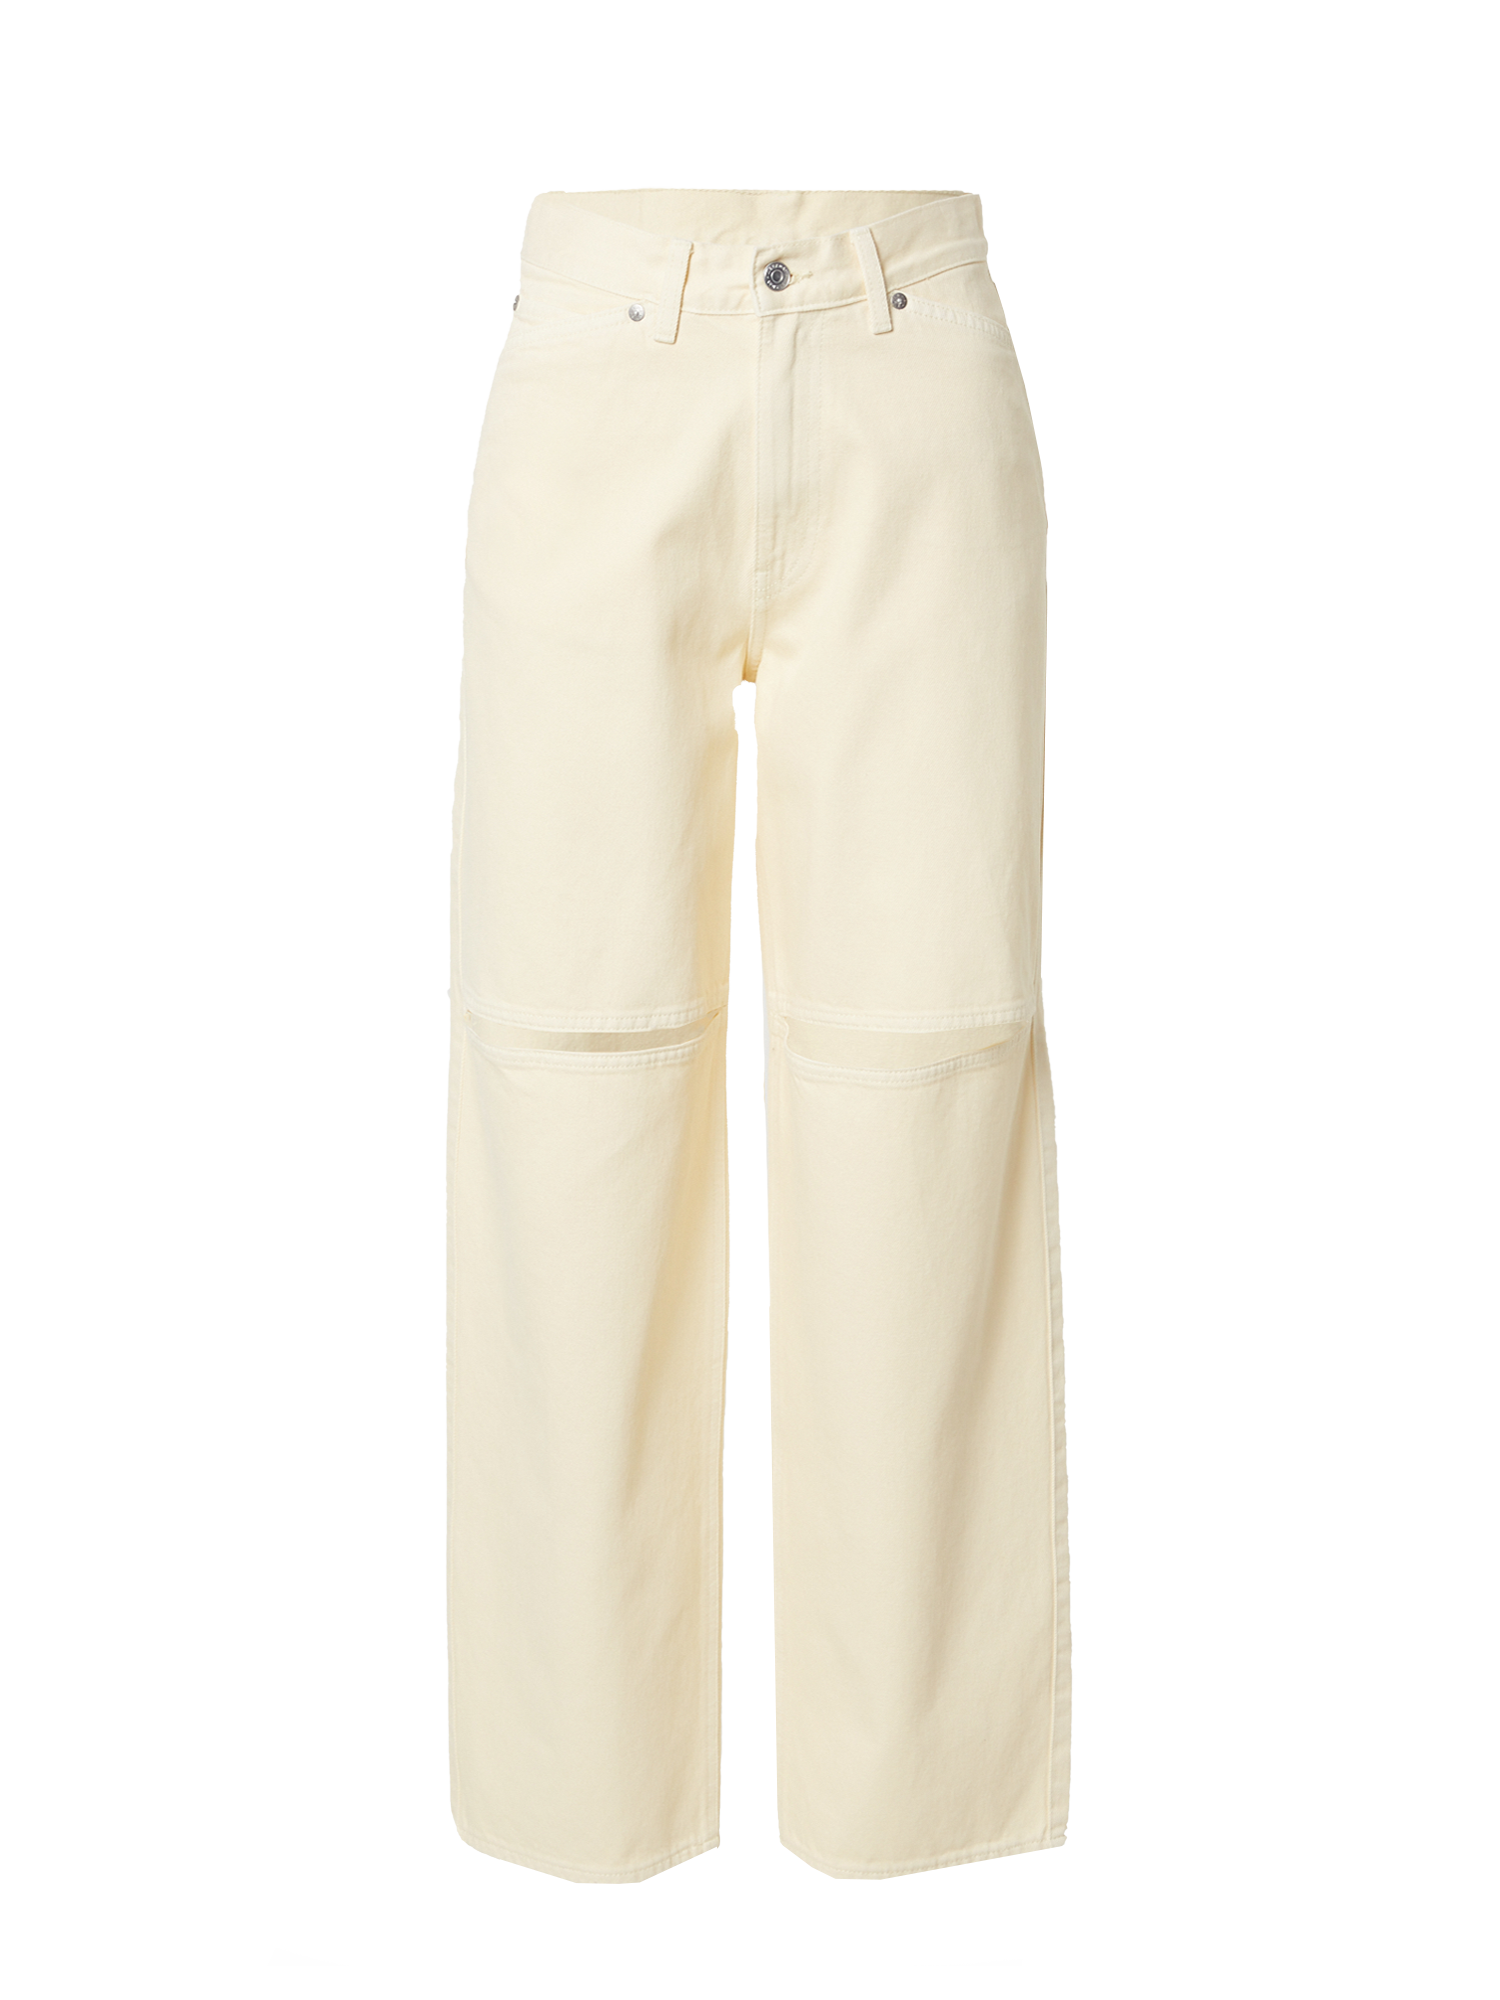 JNGFg Donna WEEKDAY Jeans Brae in Bianco Naturale 